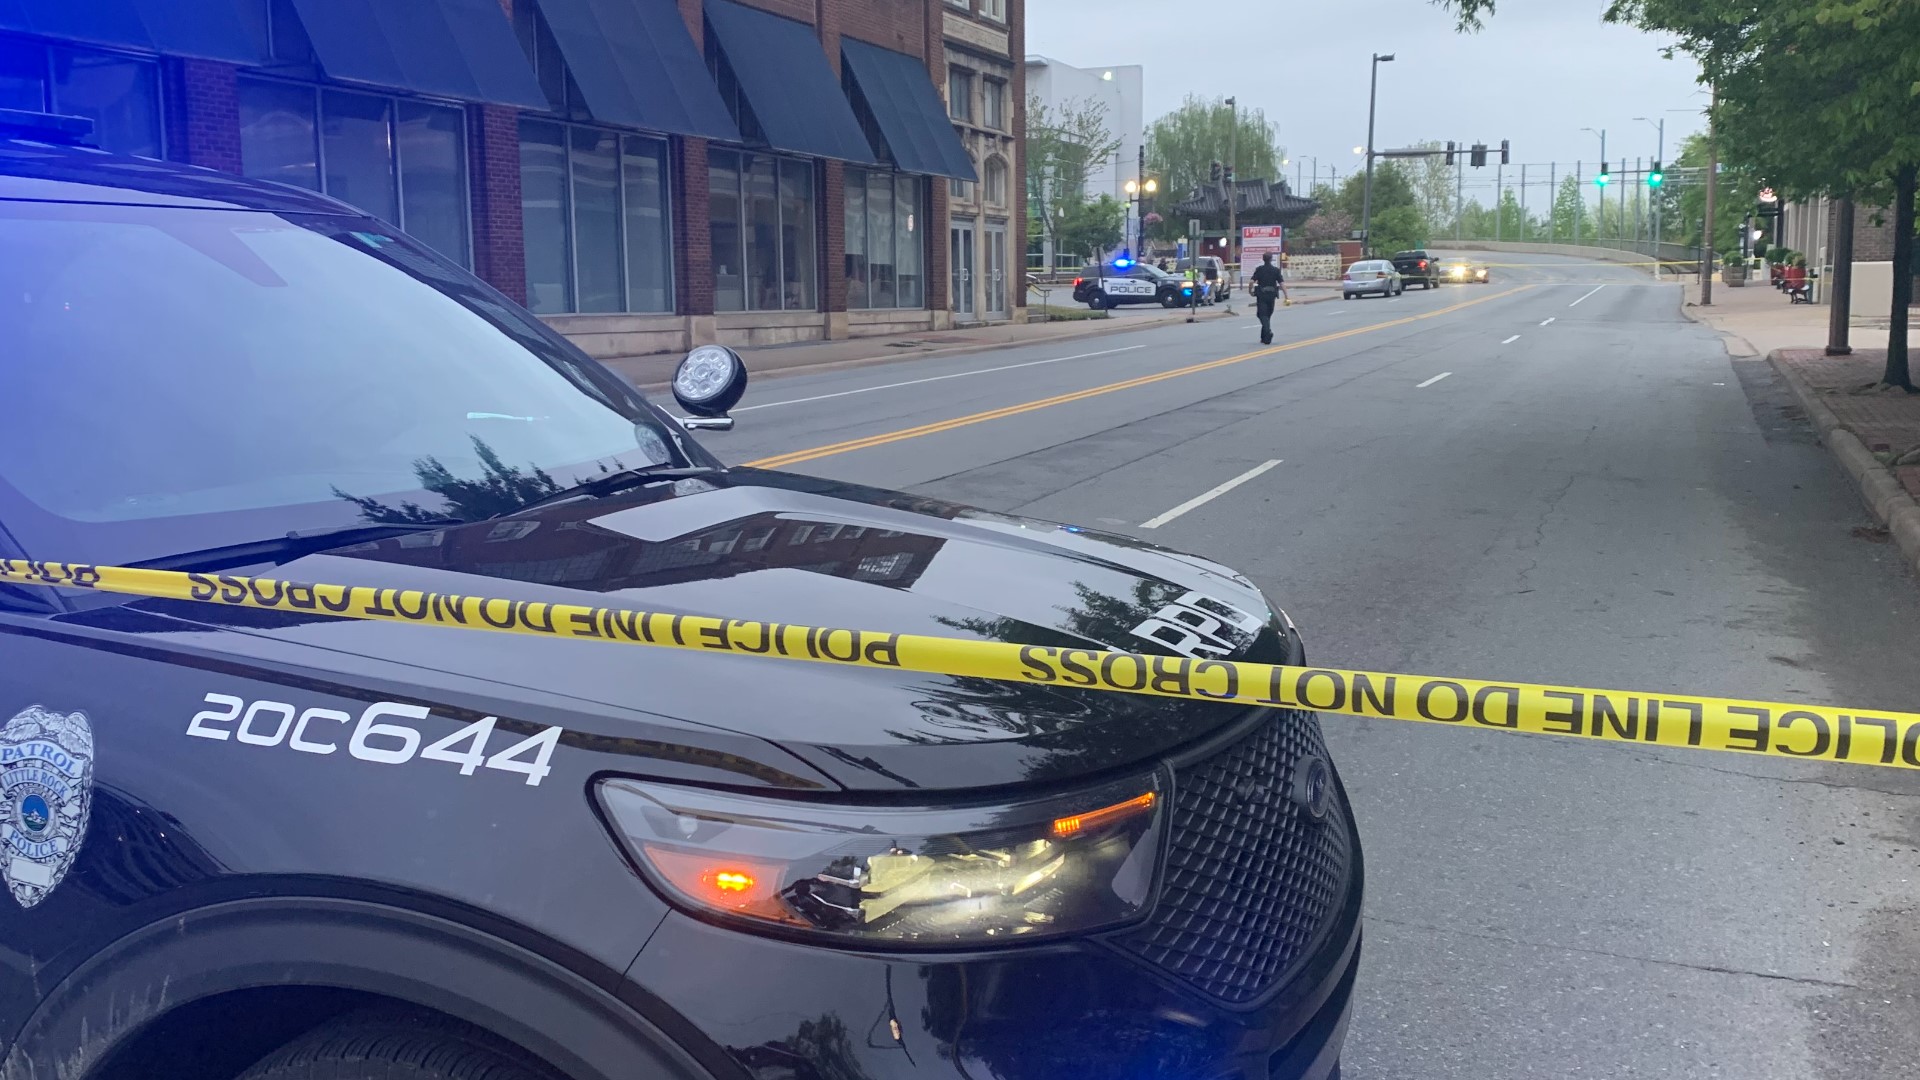 Downtown Little Rock death ruled as suicide